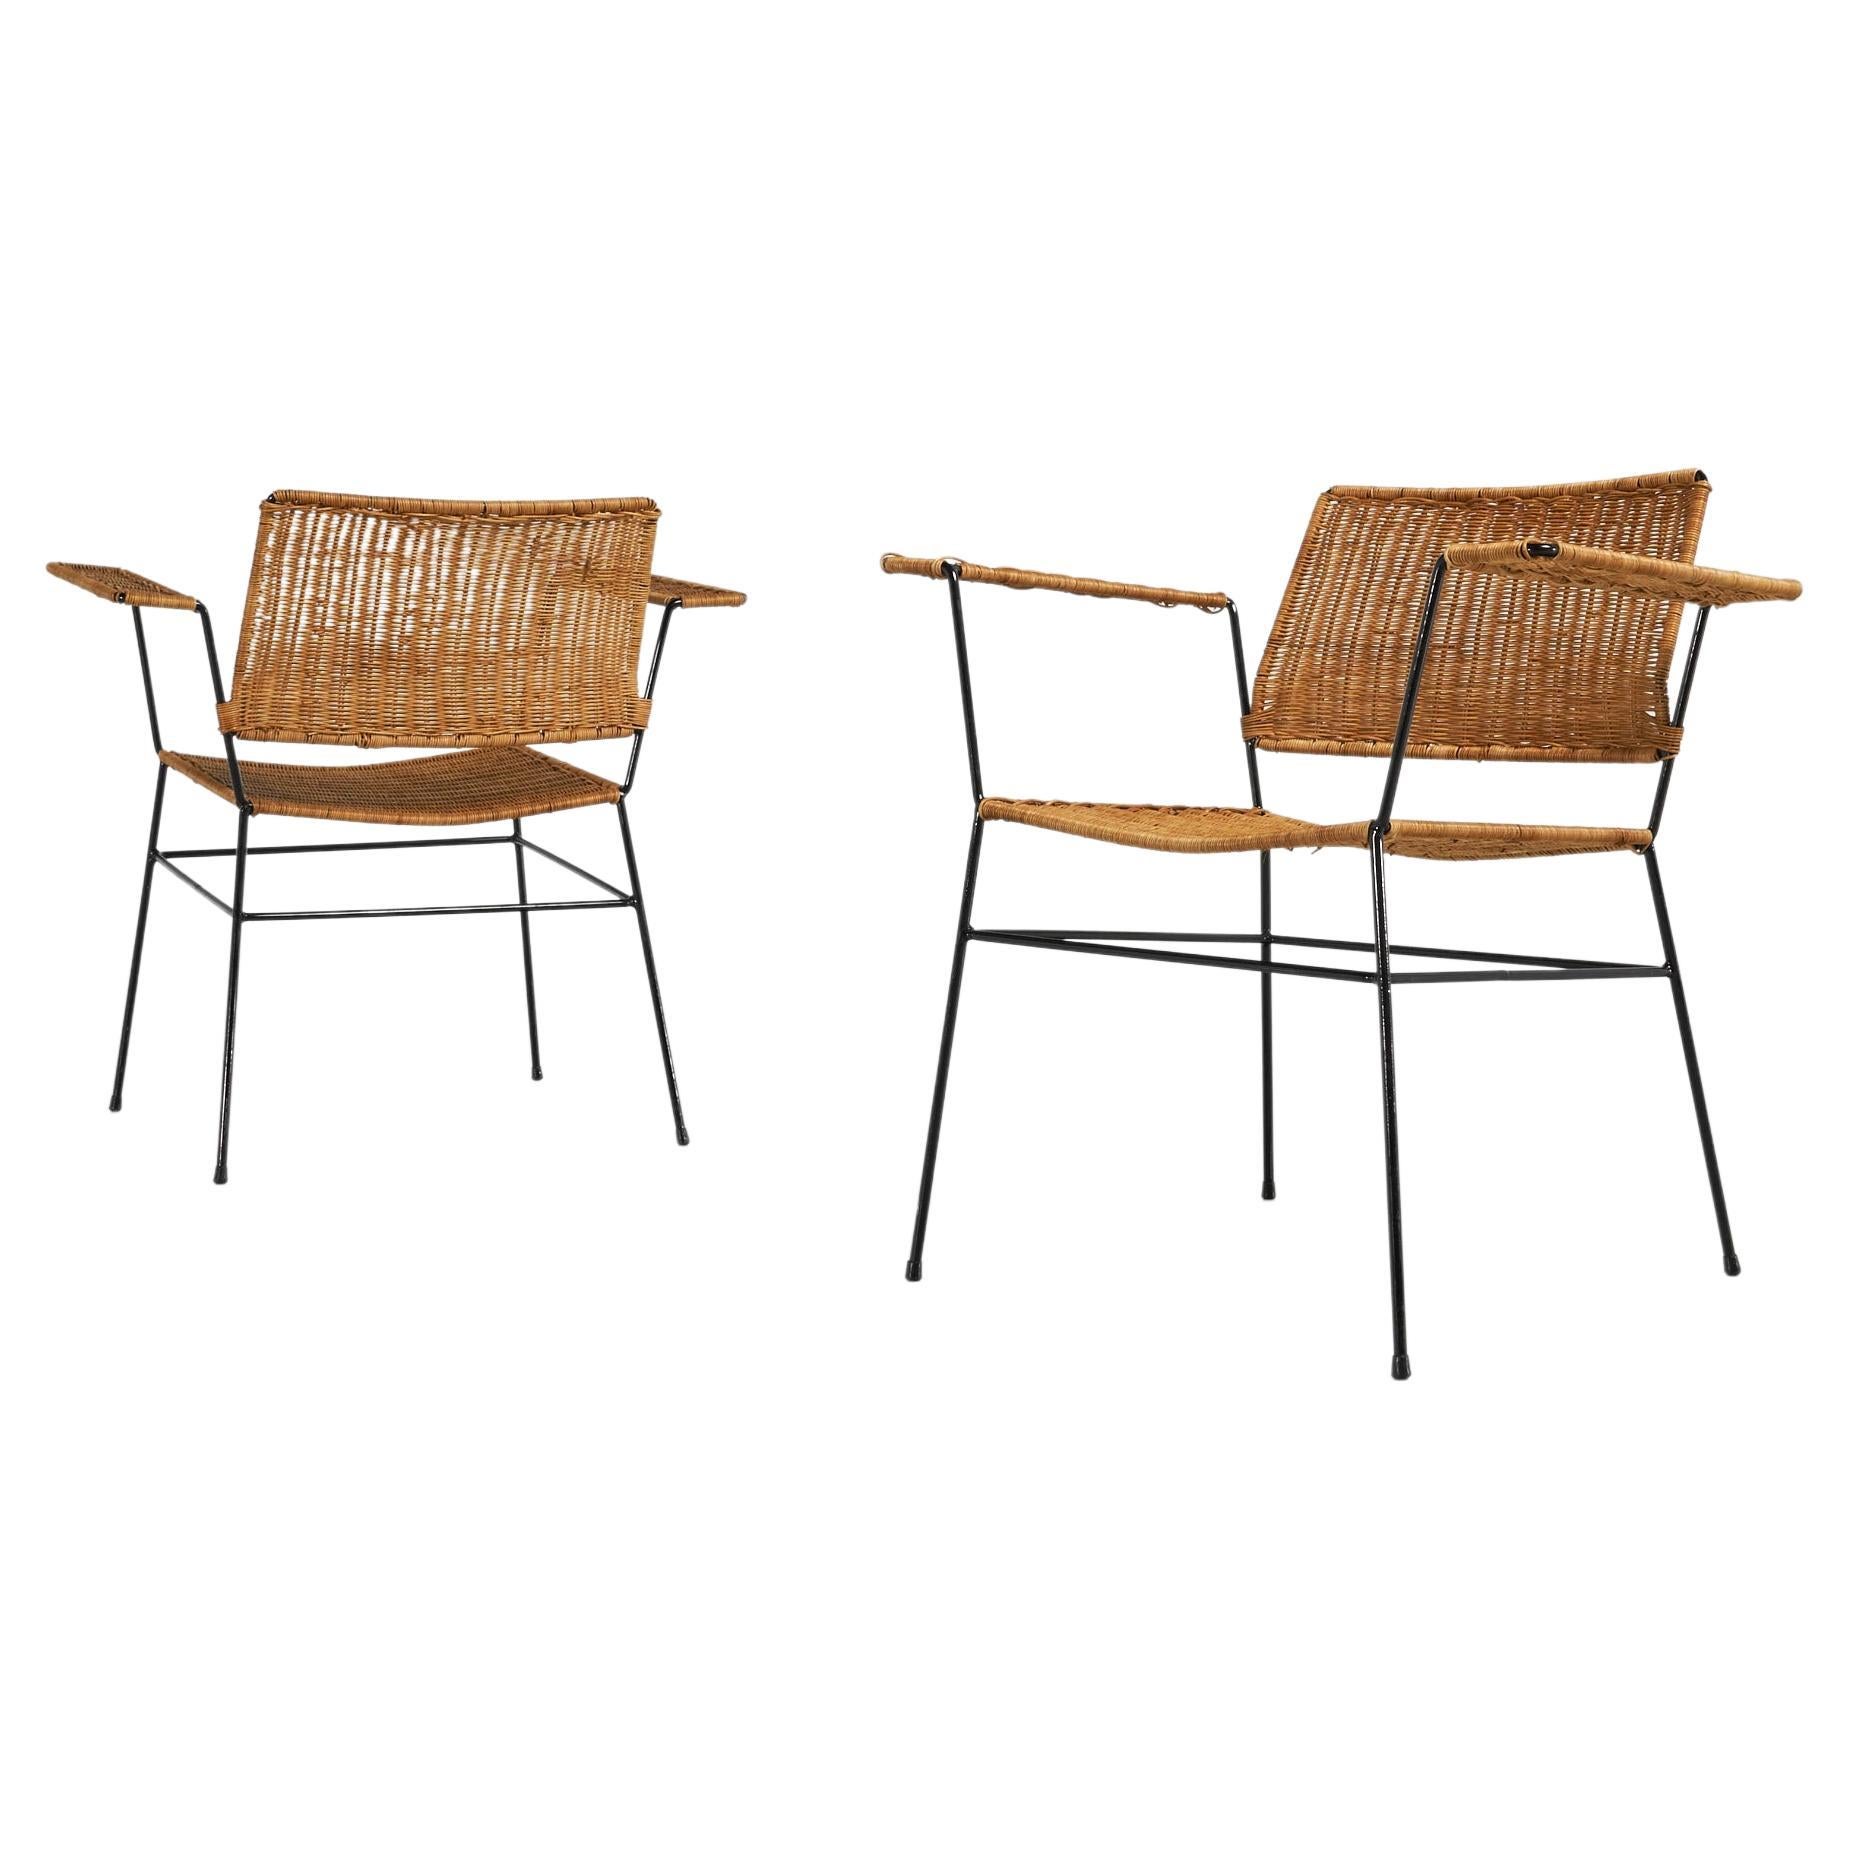 Herta Maria Witzemann Cane Armchairs Pair Germany, 1954 For Sale